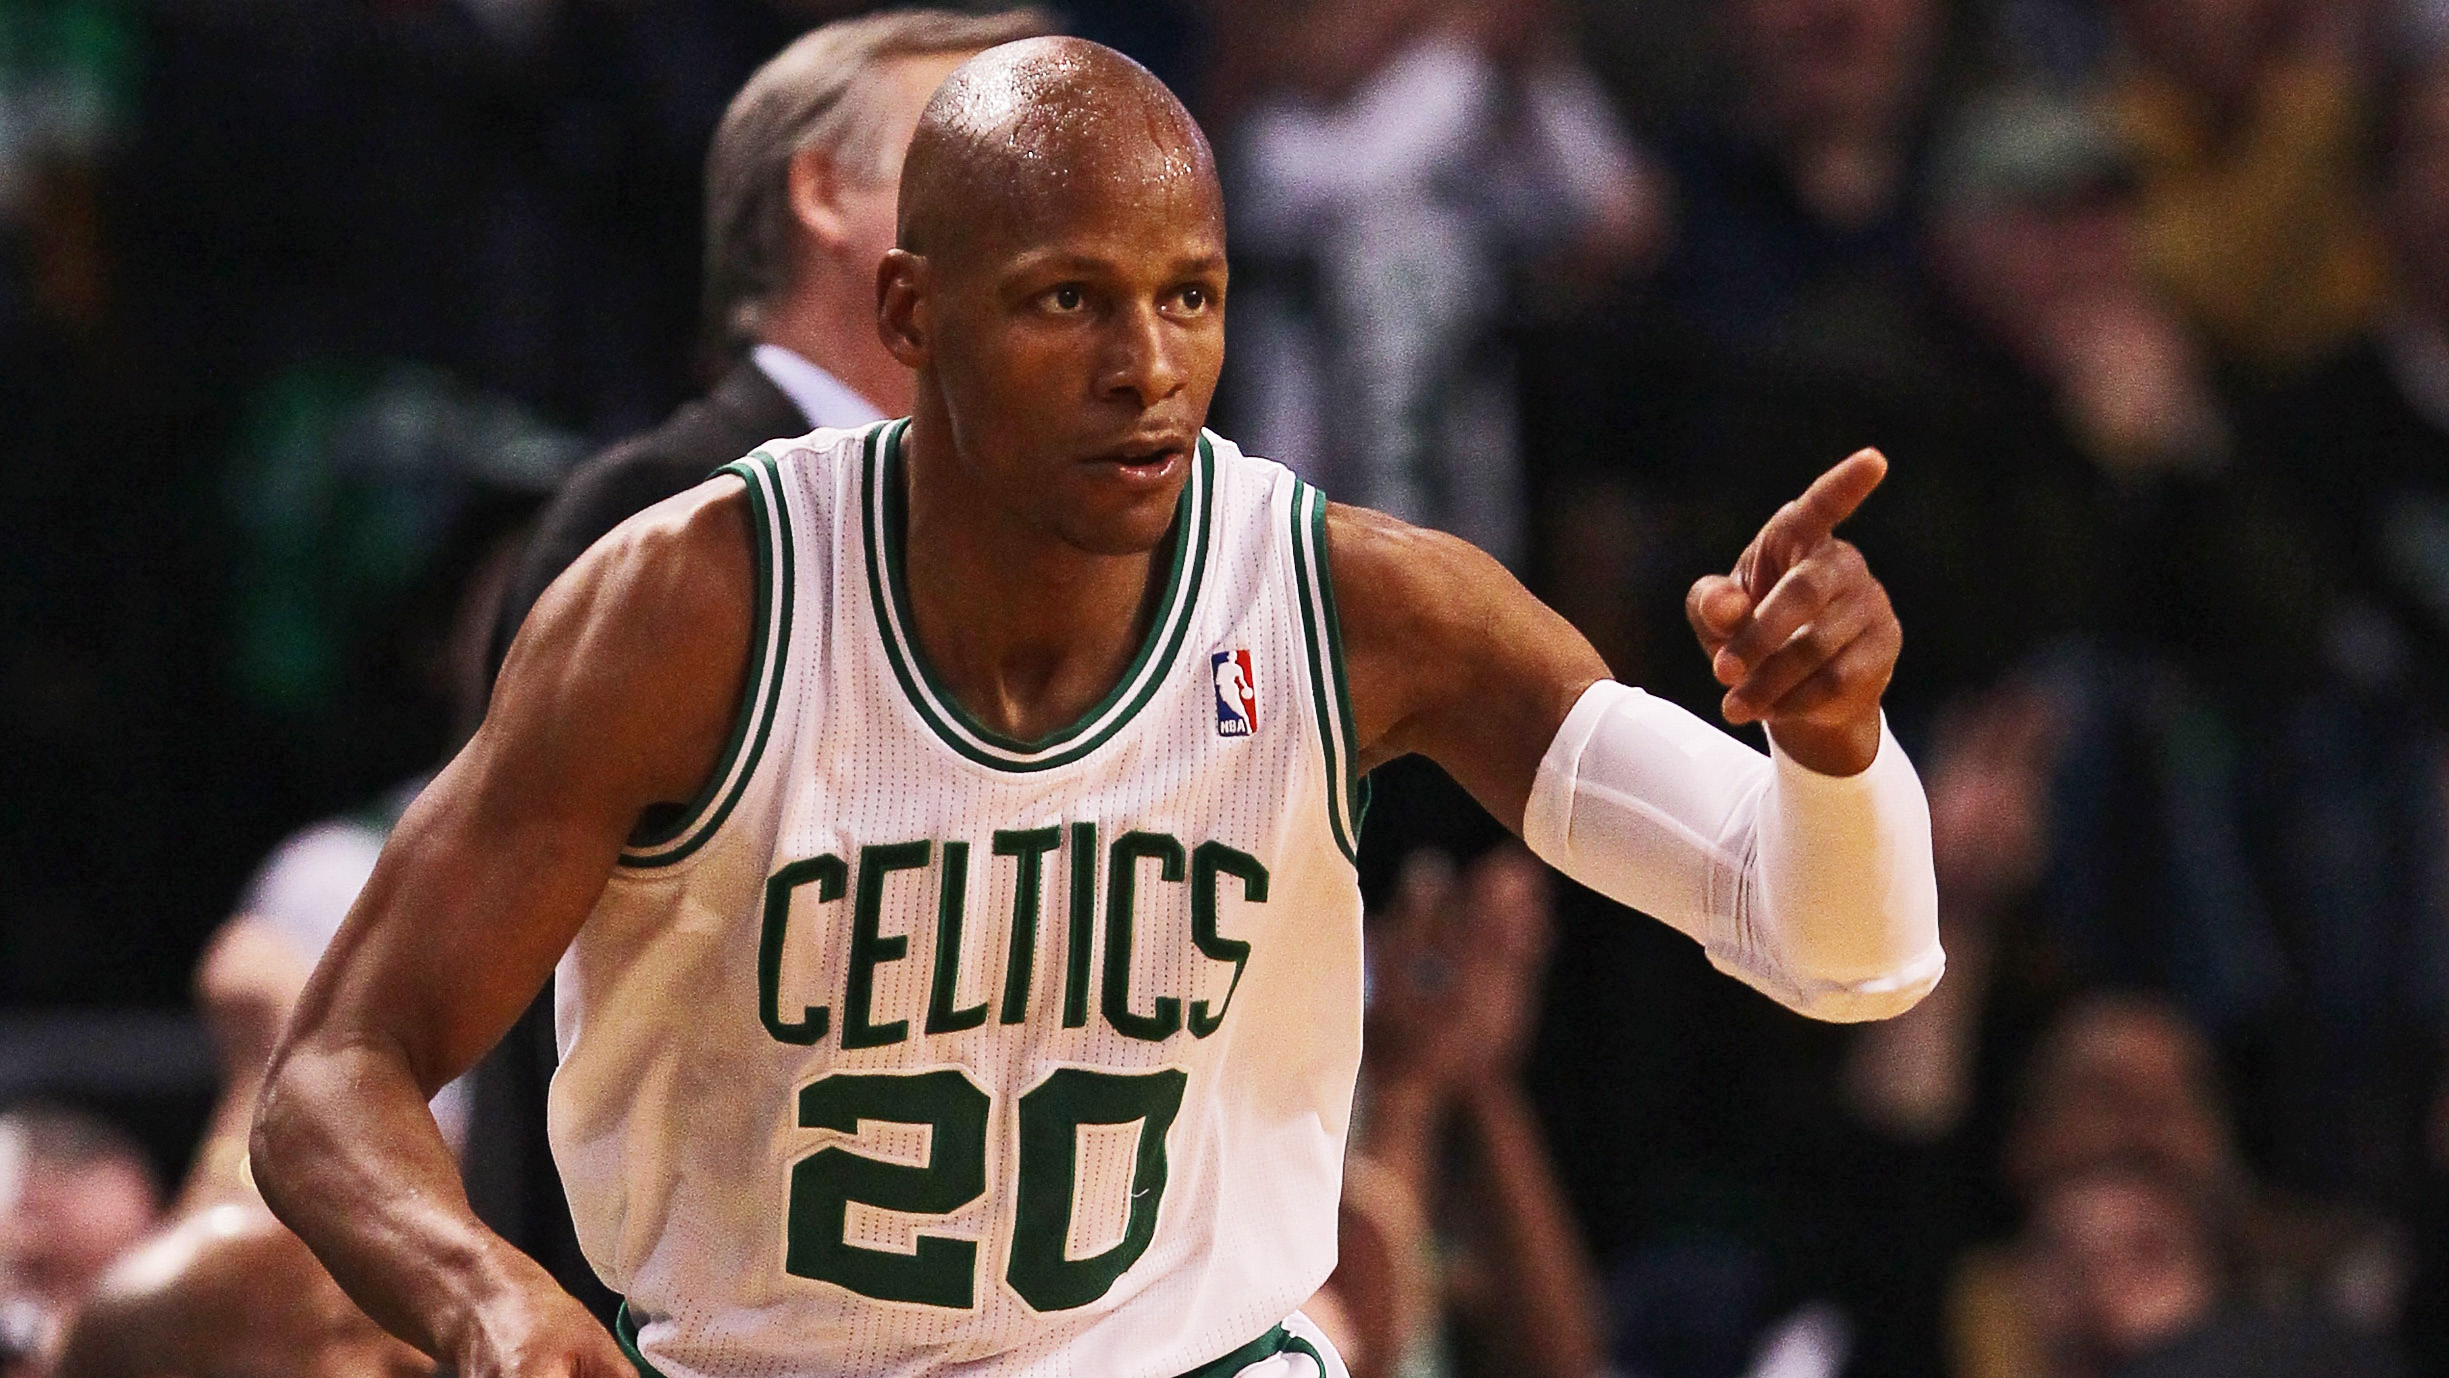 Ray Allen With Hair Is The Quarantine Surprise We Weren't Ready ...